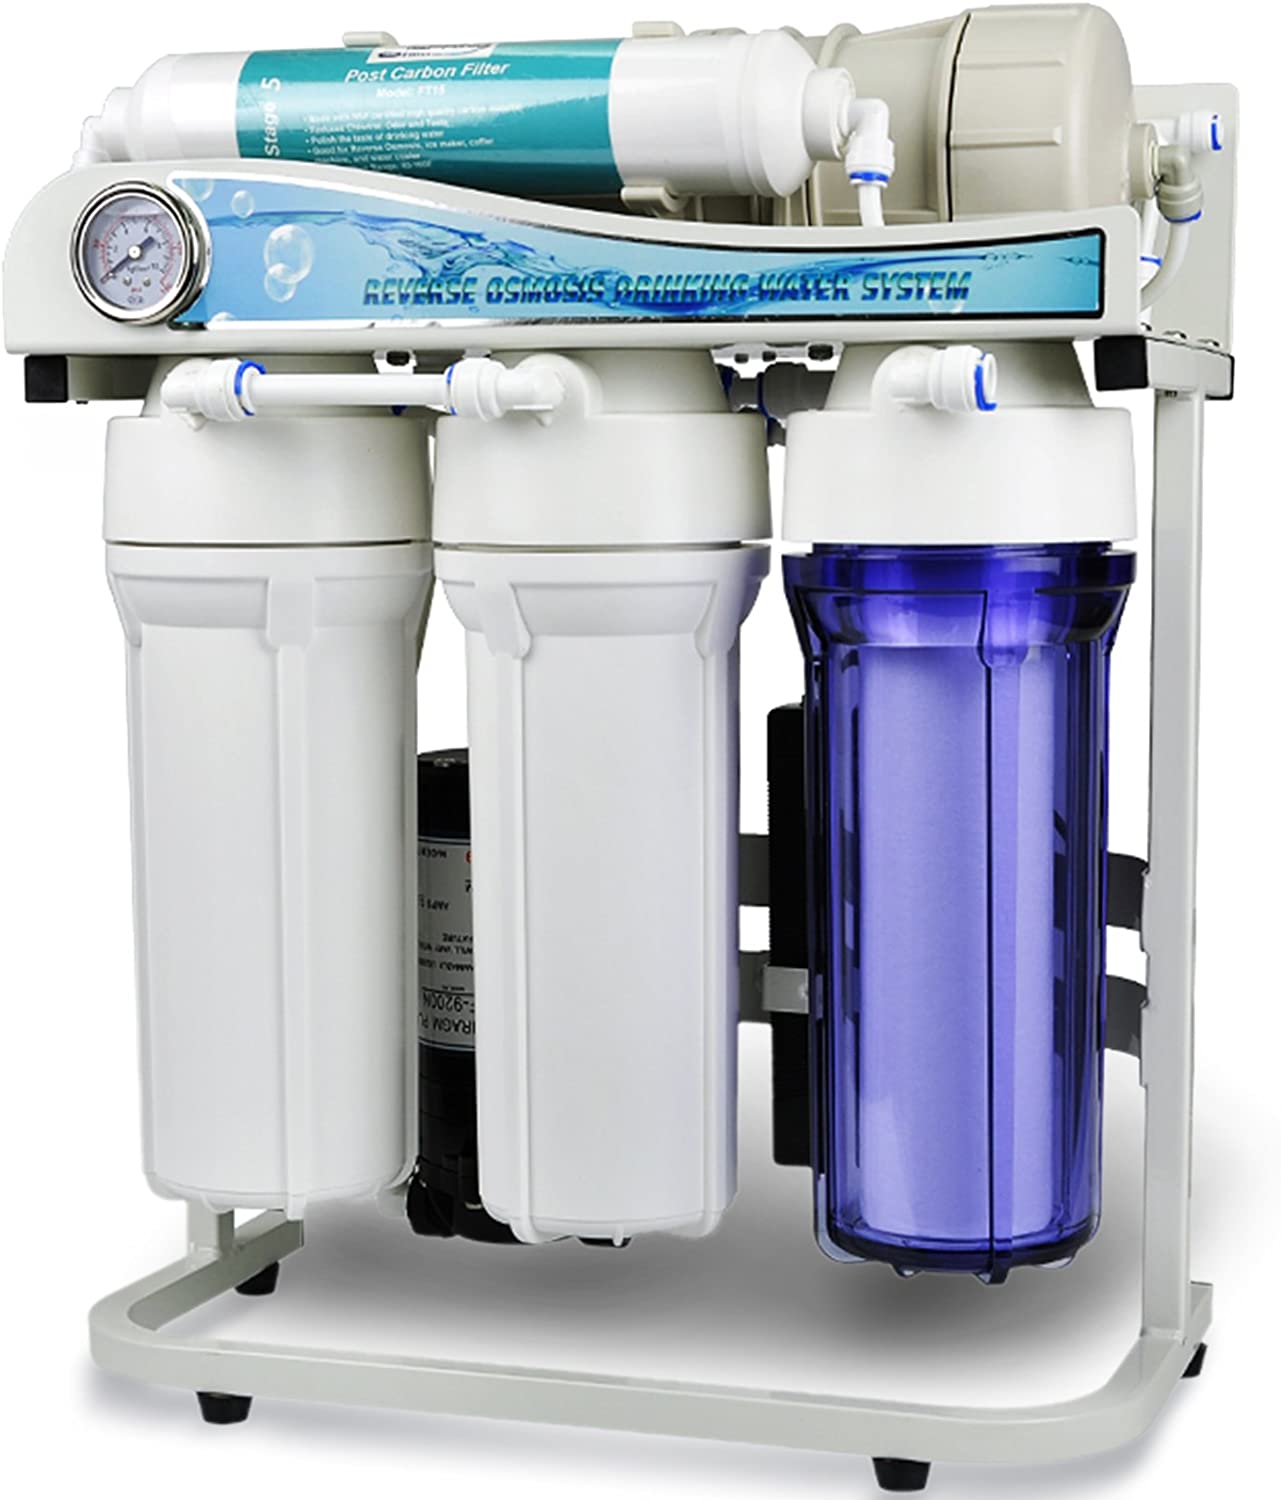 best tankless reverse osmosis systems in 2021